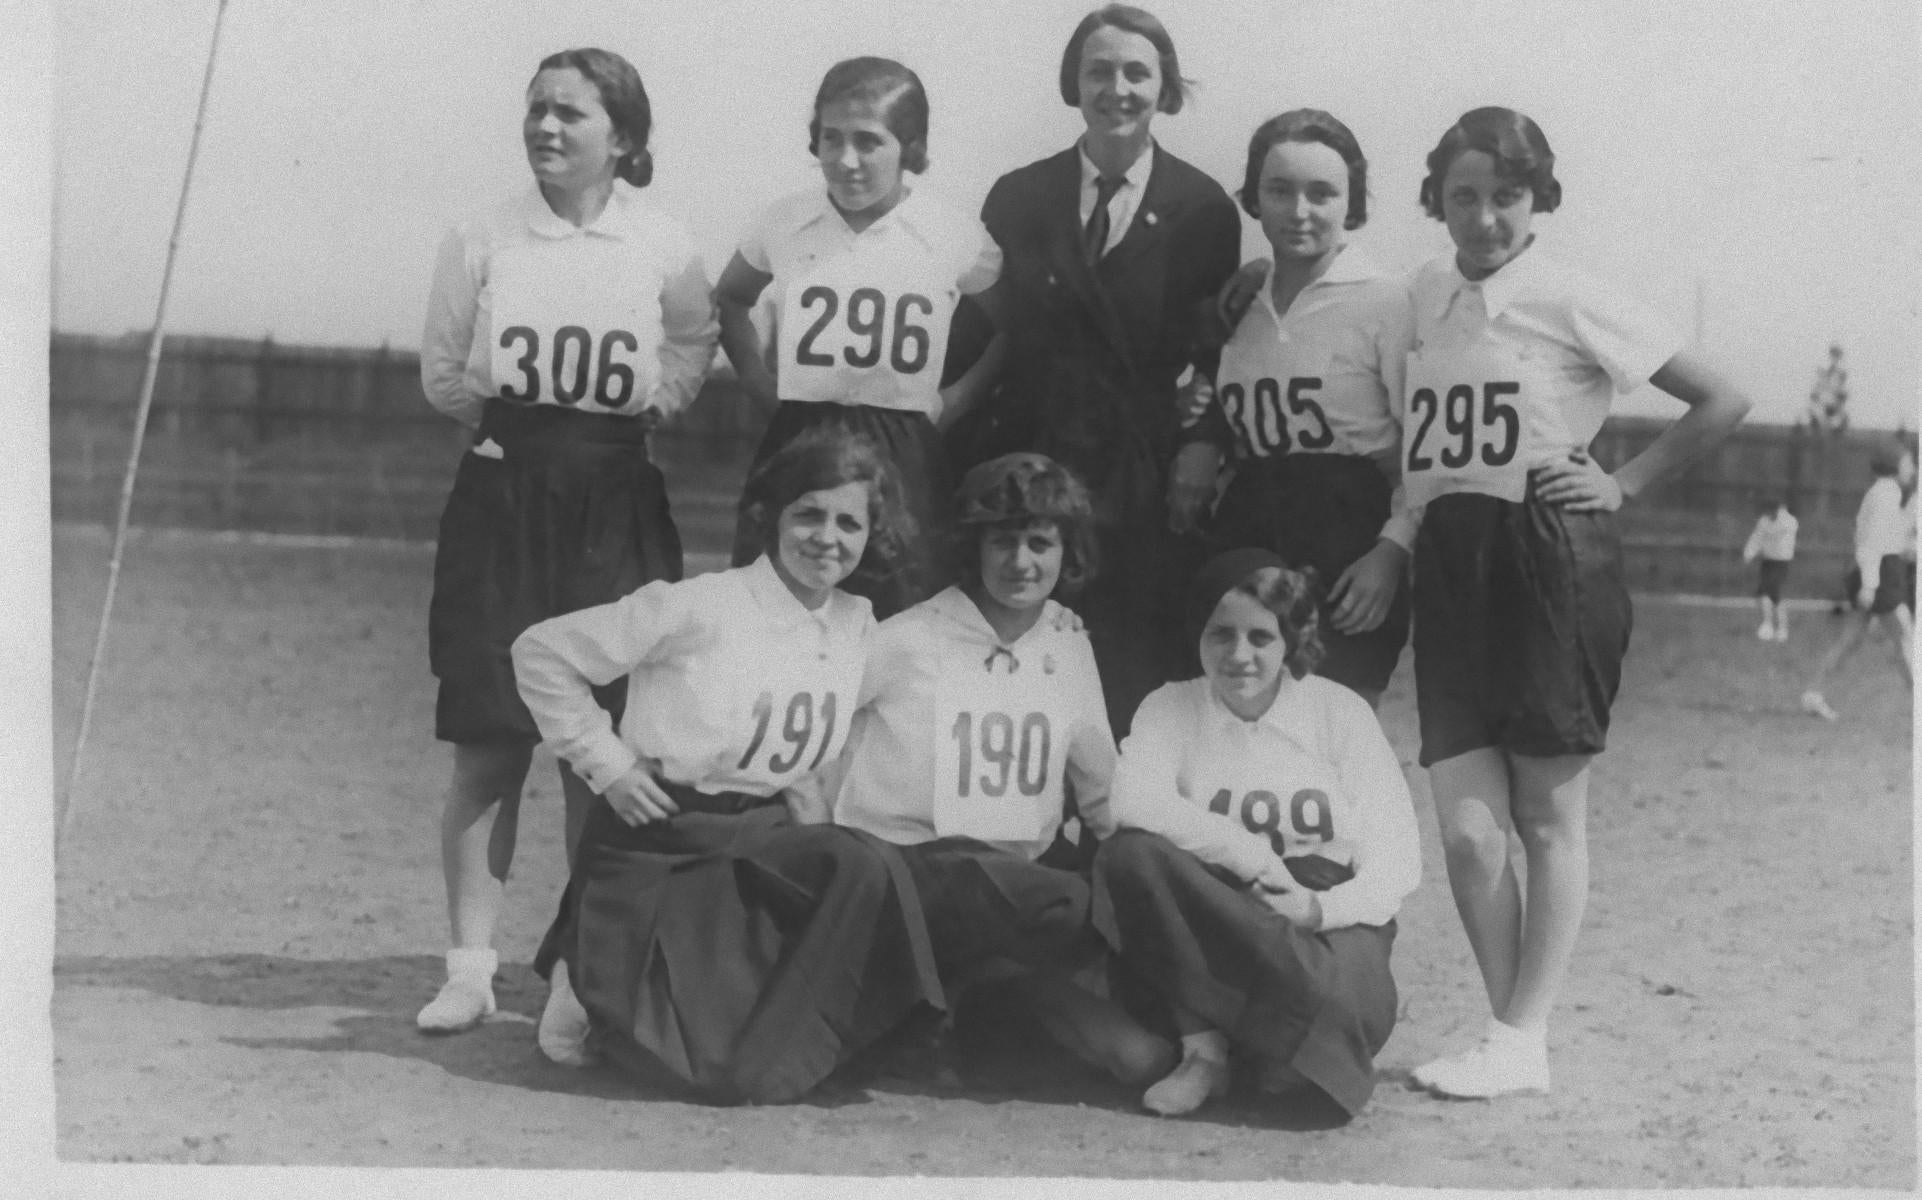 Young Girls Posing for a Photo Before a Marathon - Vintage b/w Photo - 1934 ca.